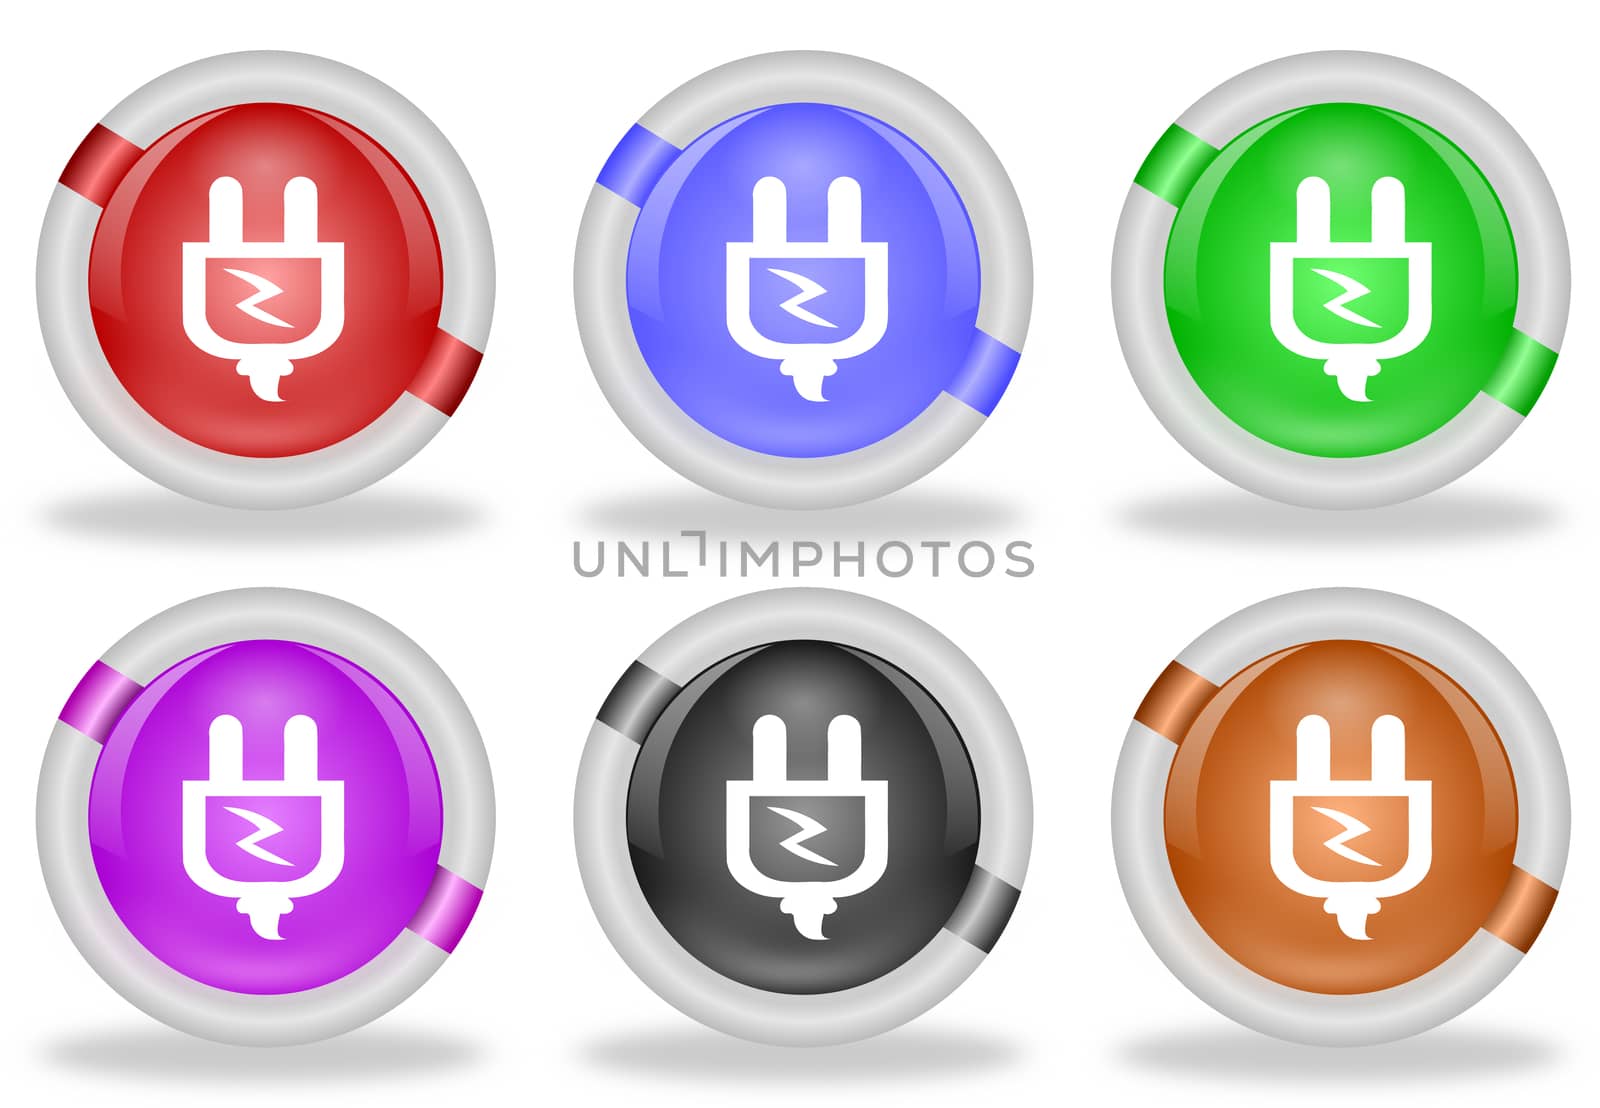 Set of electric power plug web icon buttons with beveled white rims in six pastel colors - red, blue, green, pink, black and brown
